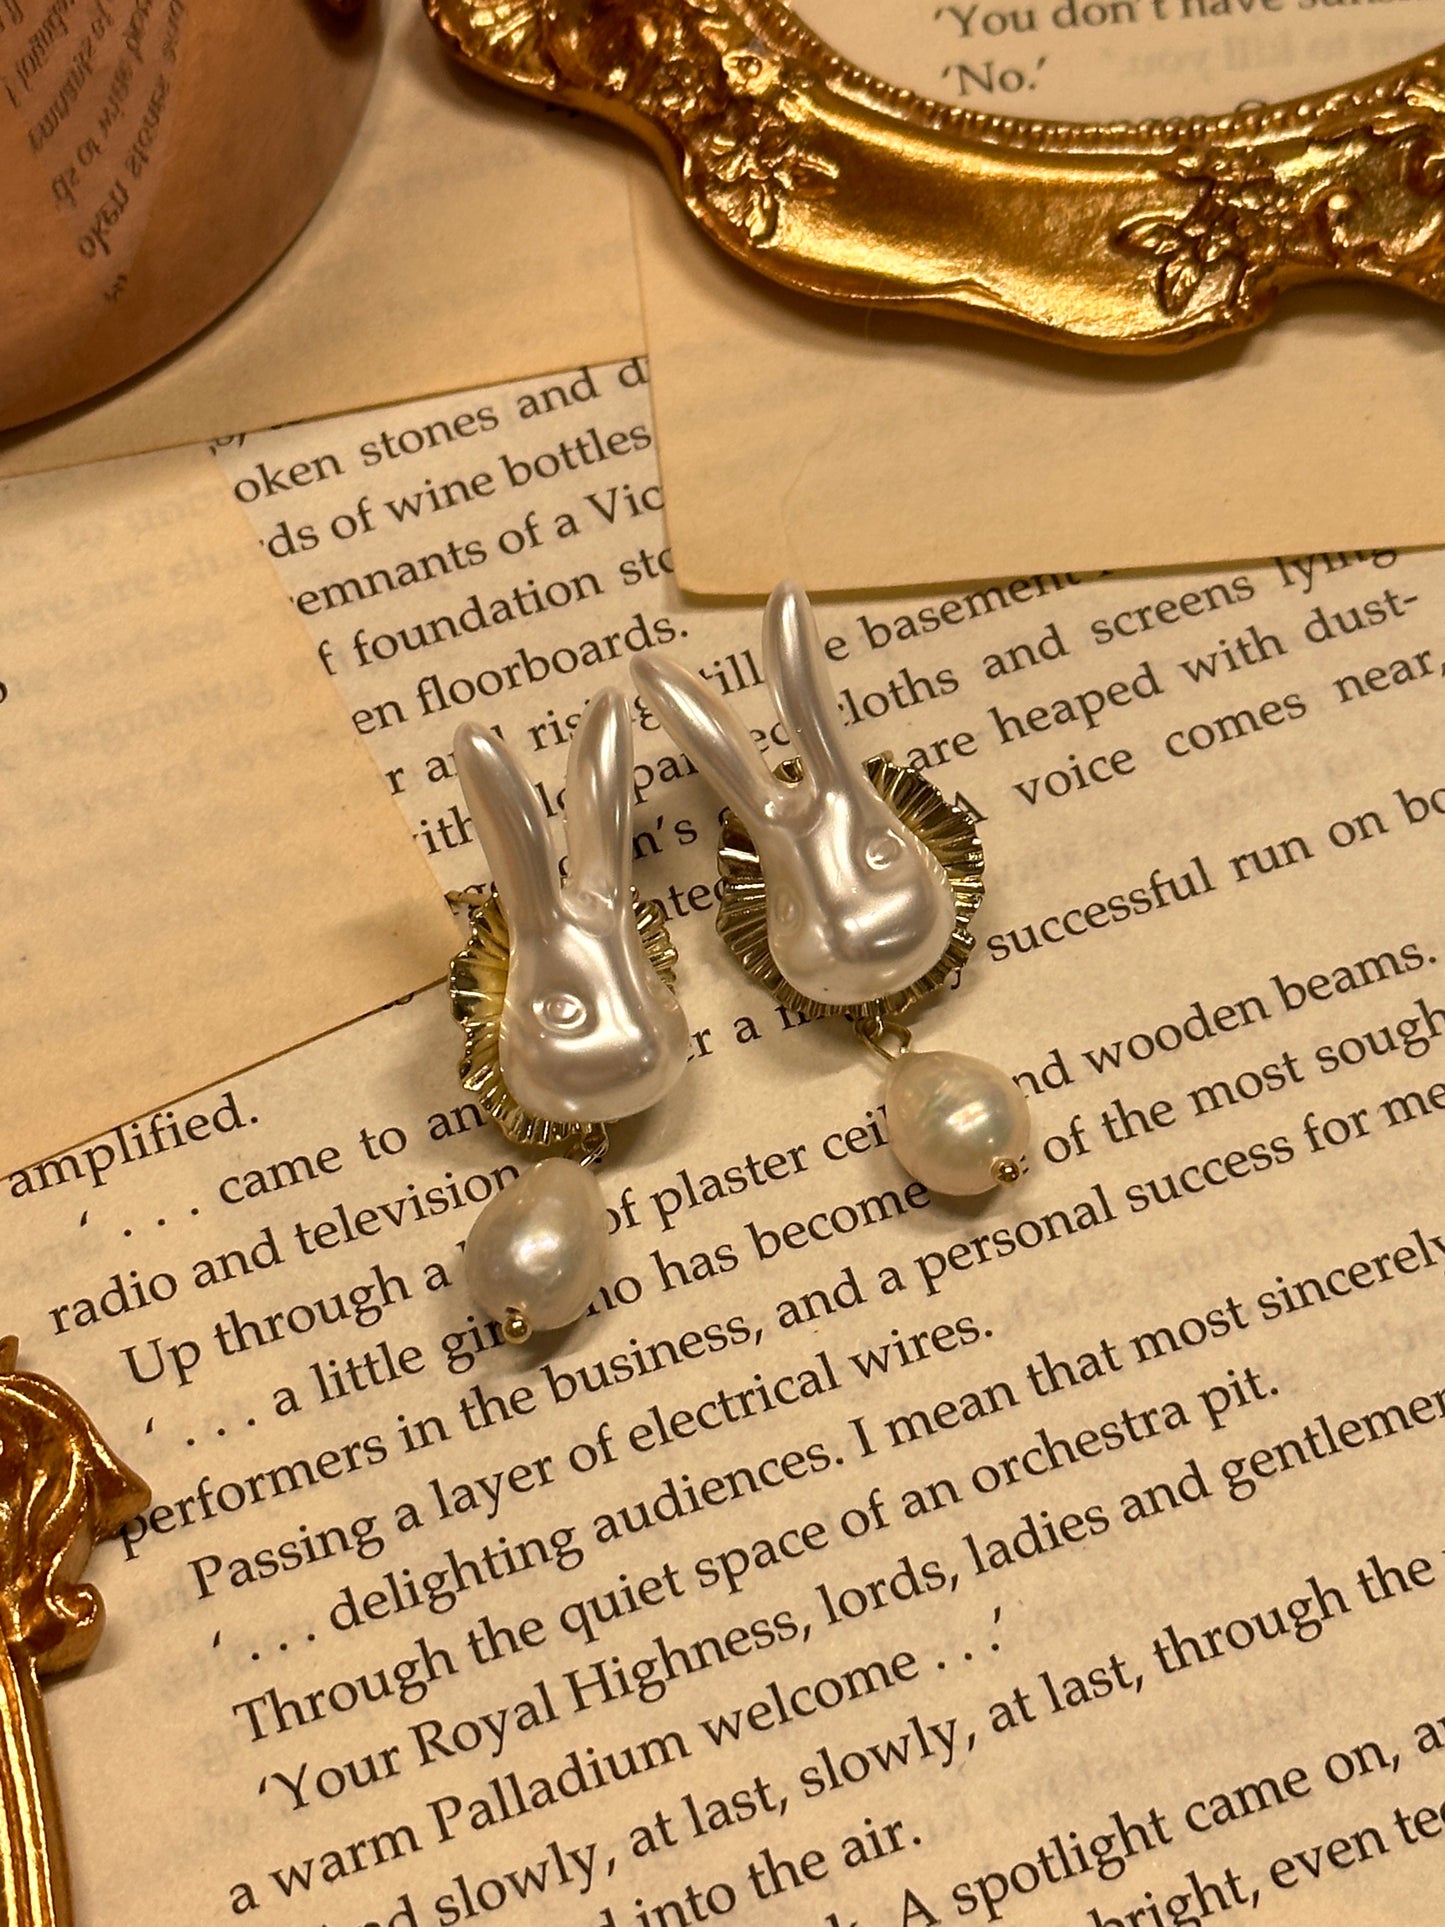 Adorable Bunny and Pearl Earrings